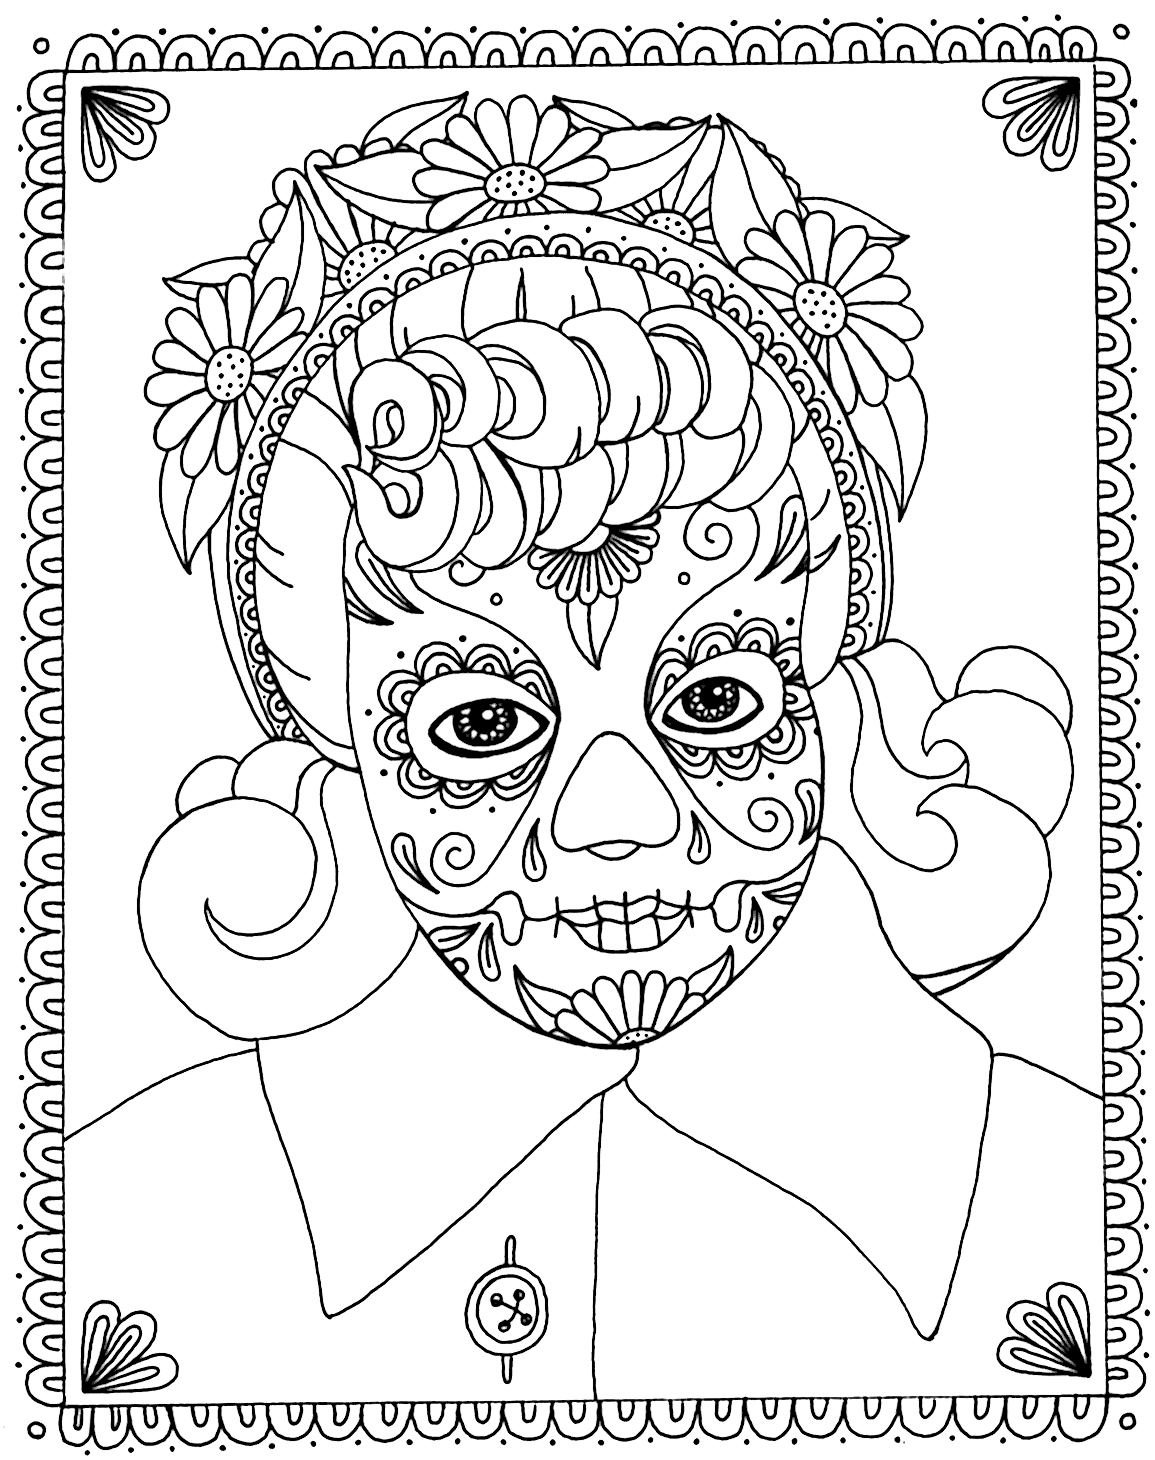 yucca-flats-n-m-wenchkin-s-coloring-pages-mini-mom